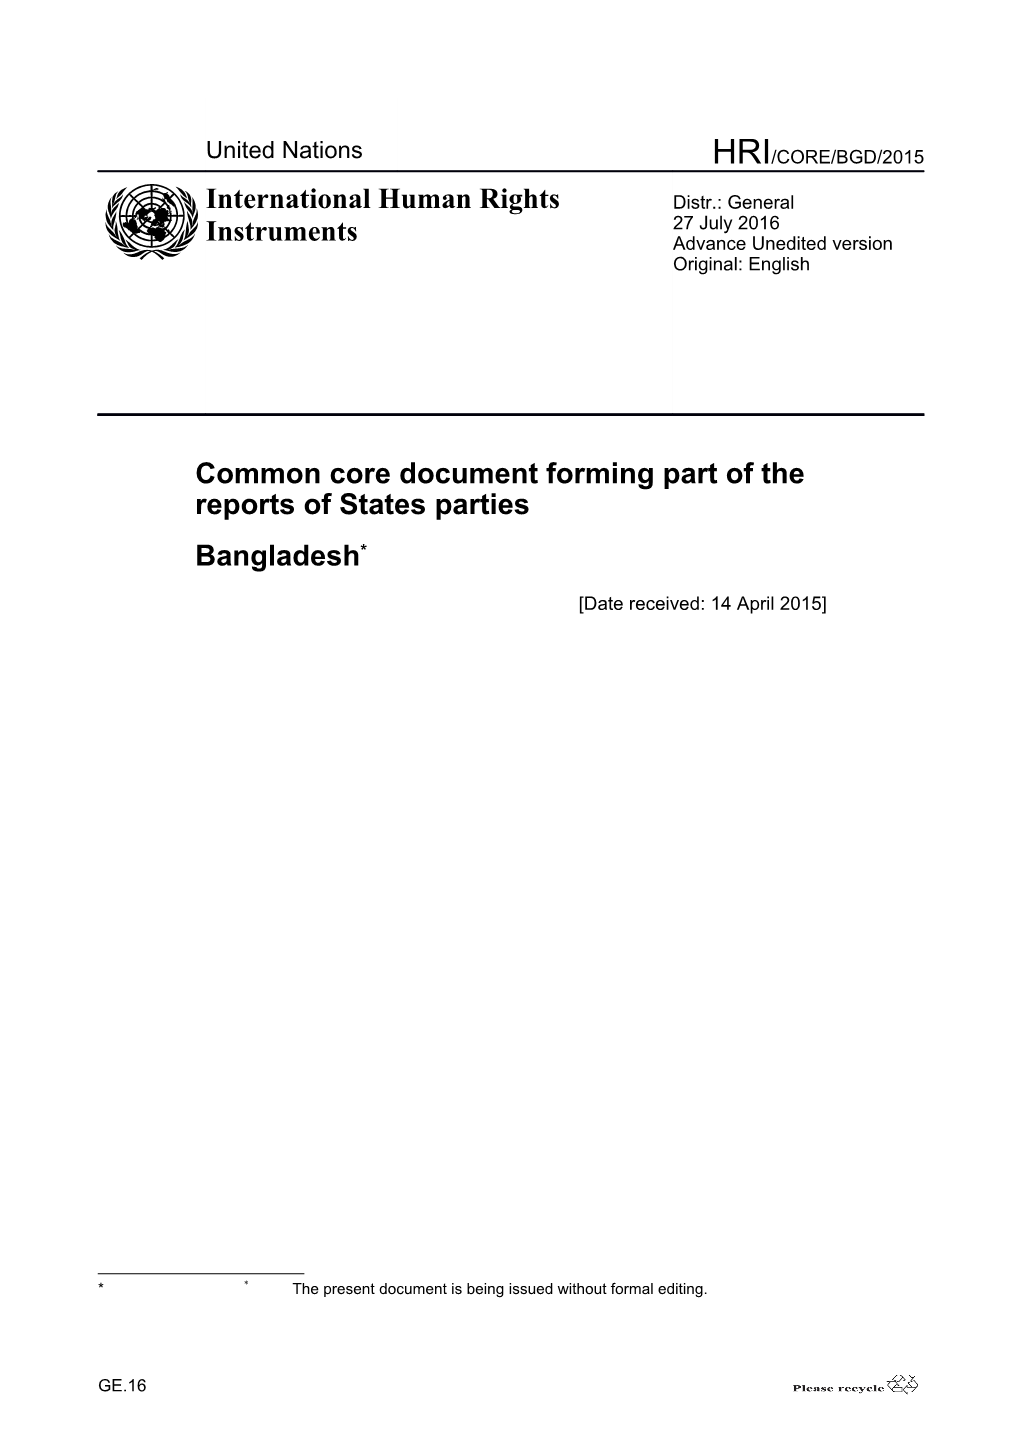 Common Core Document Forming Part of the Reports of States Parties